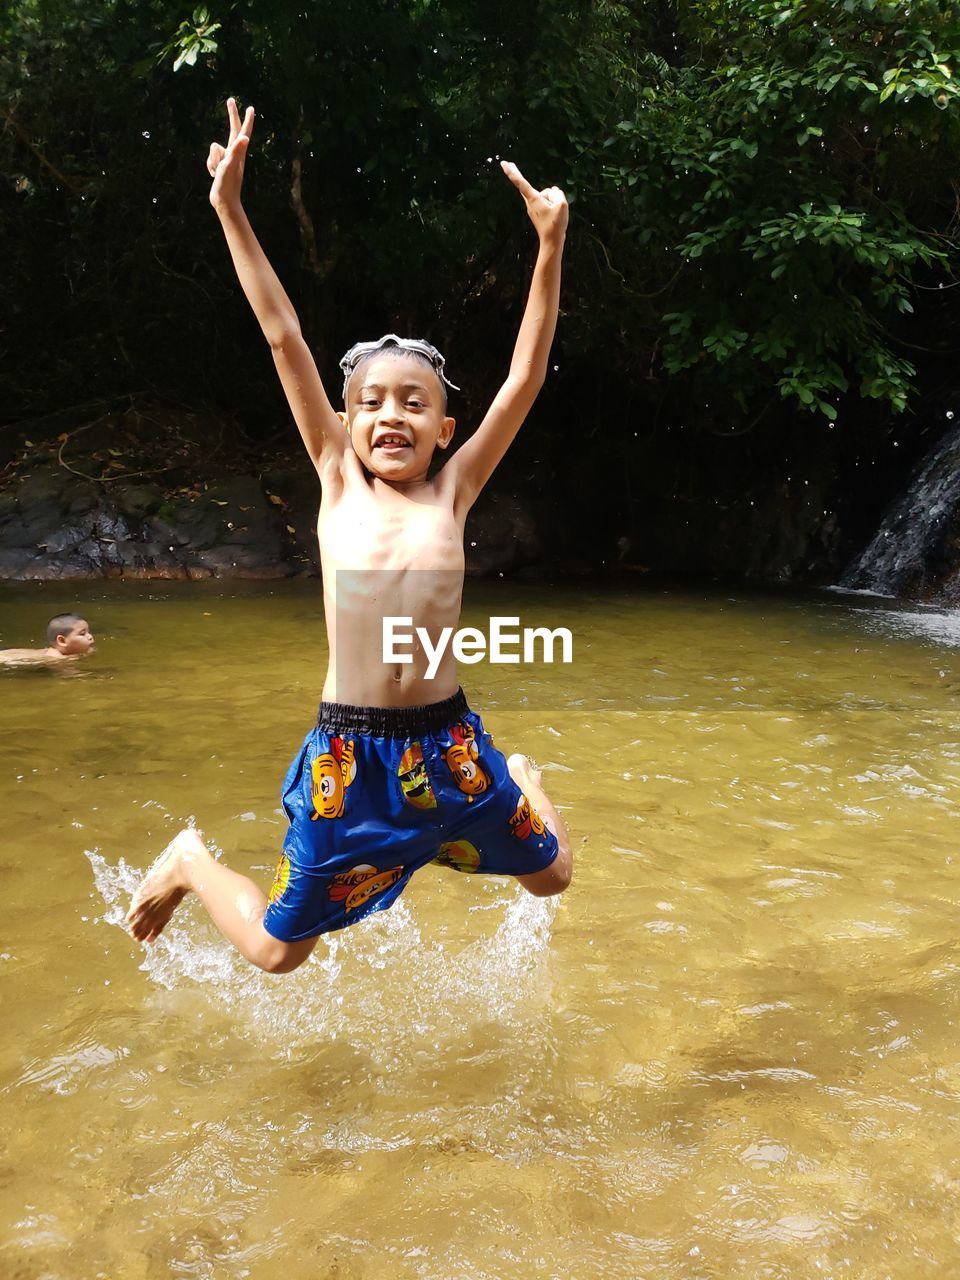 Portrait of shirtless boy with arms raised jumping in river against plants